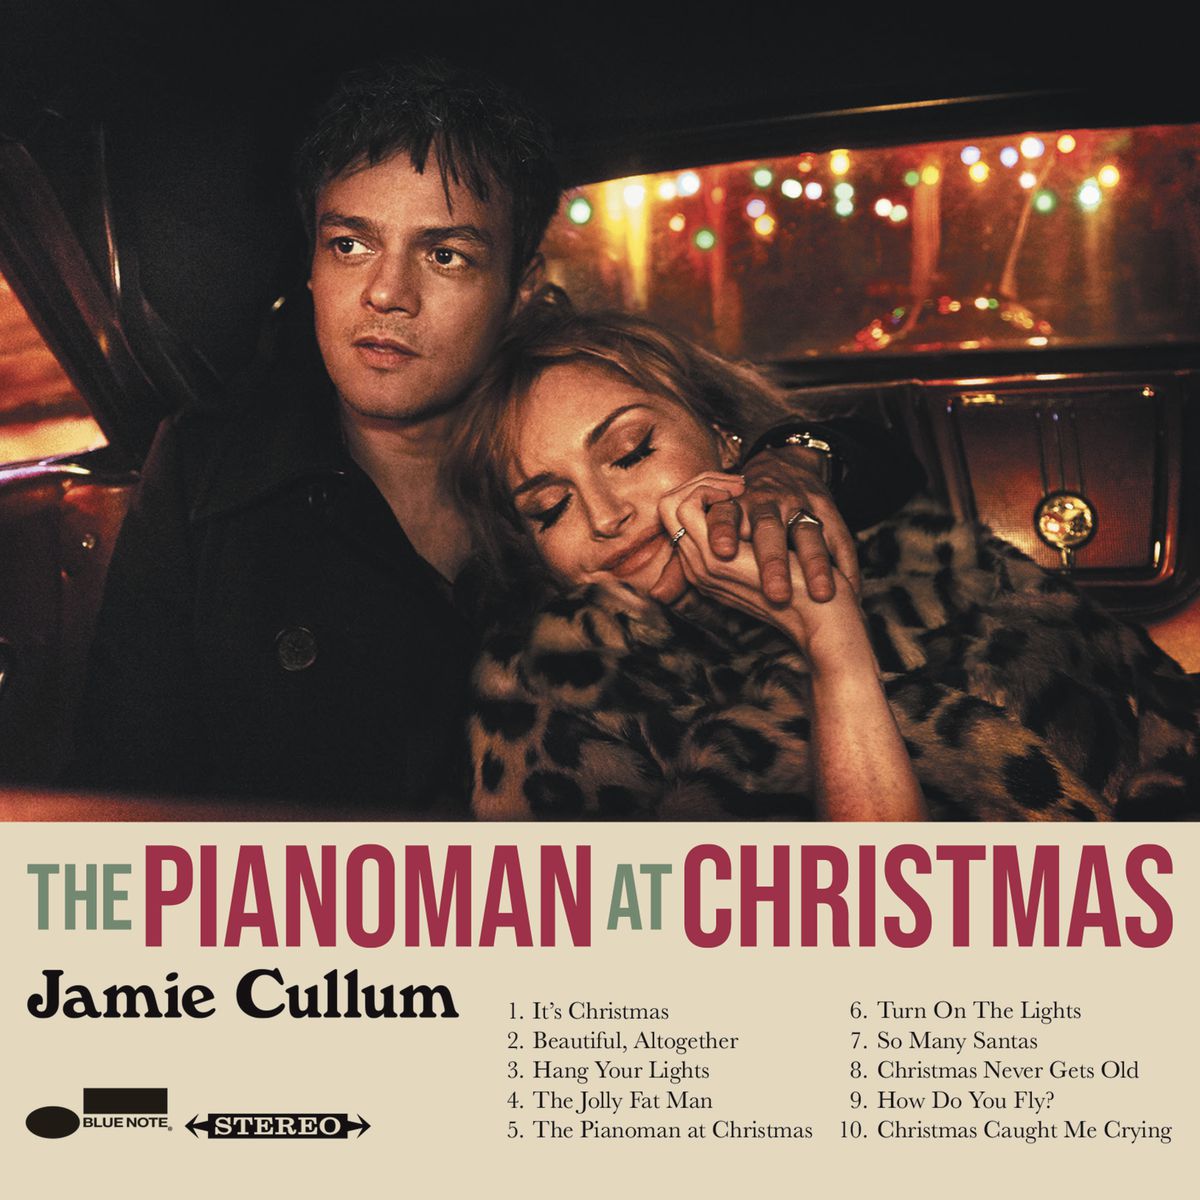 This cover image released by Blue Note Records shows “The Pianoman at Christmas” by Jamie Cullum.